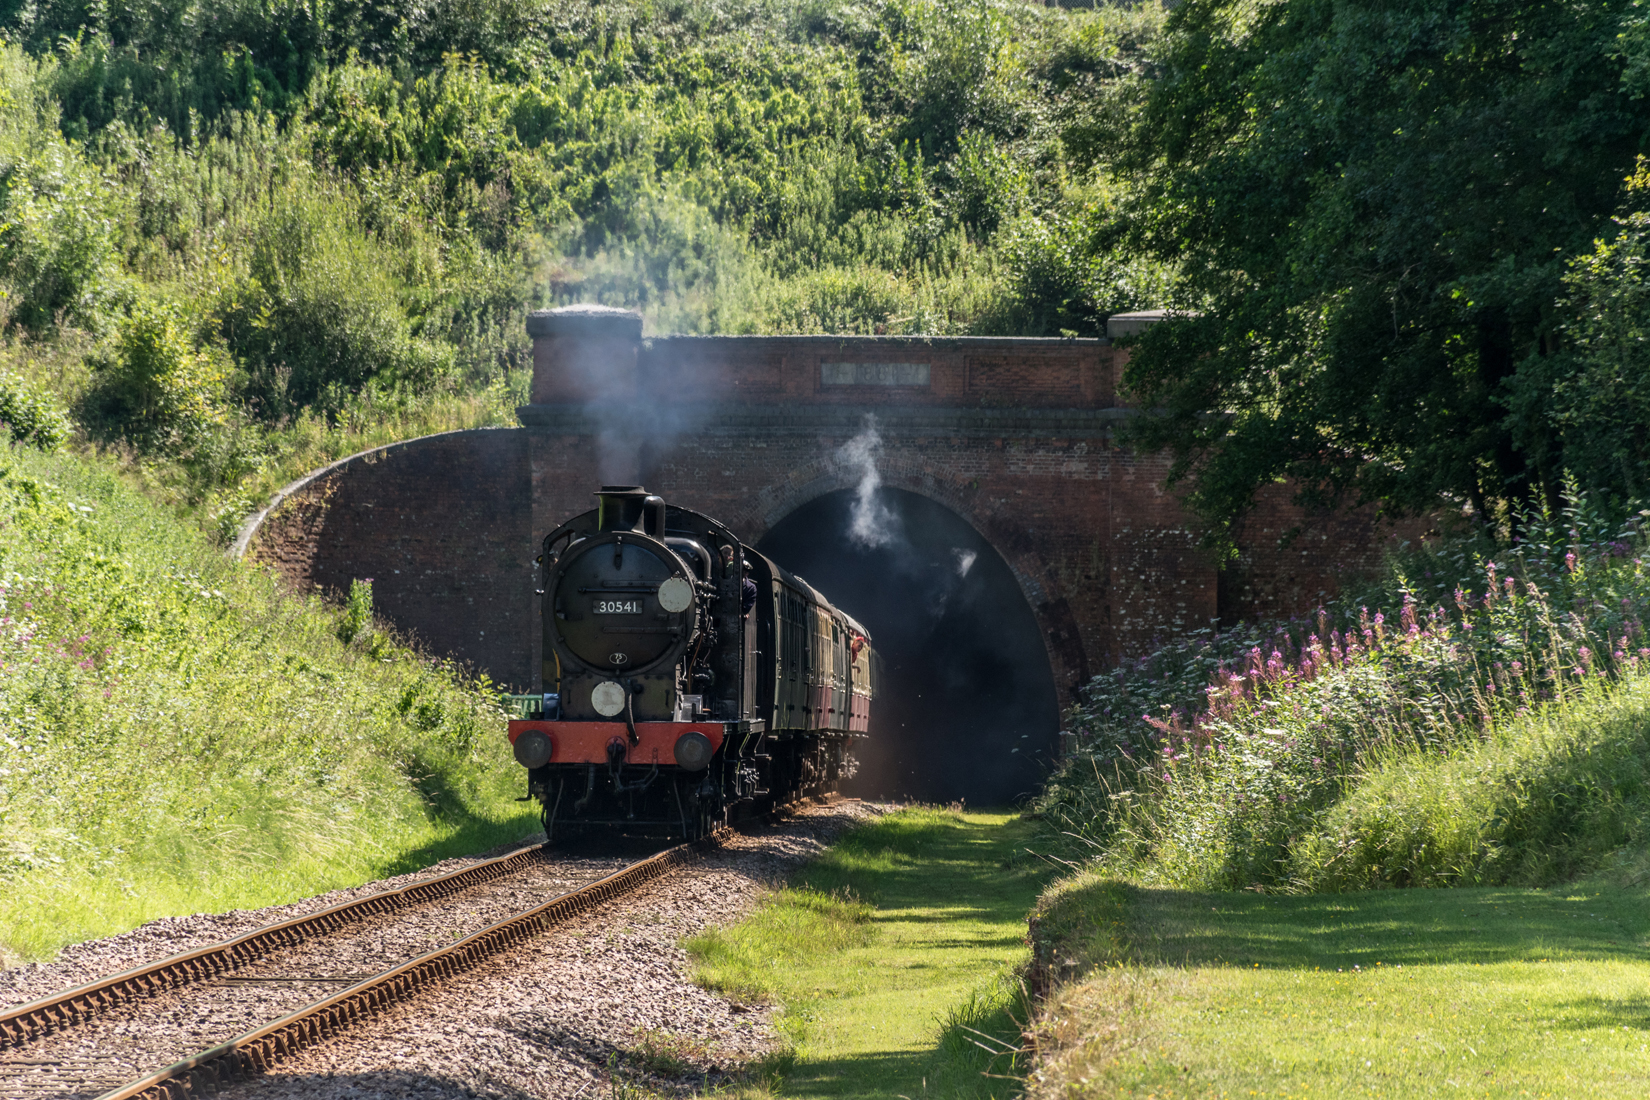 30541 eases off as it emerges from the steep climb through West Hoathly tunnel